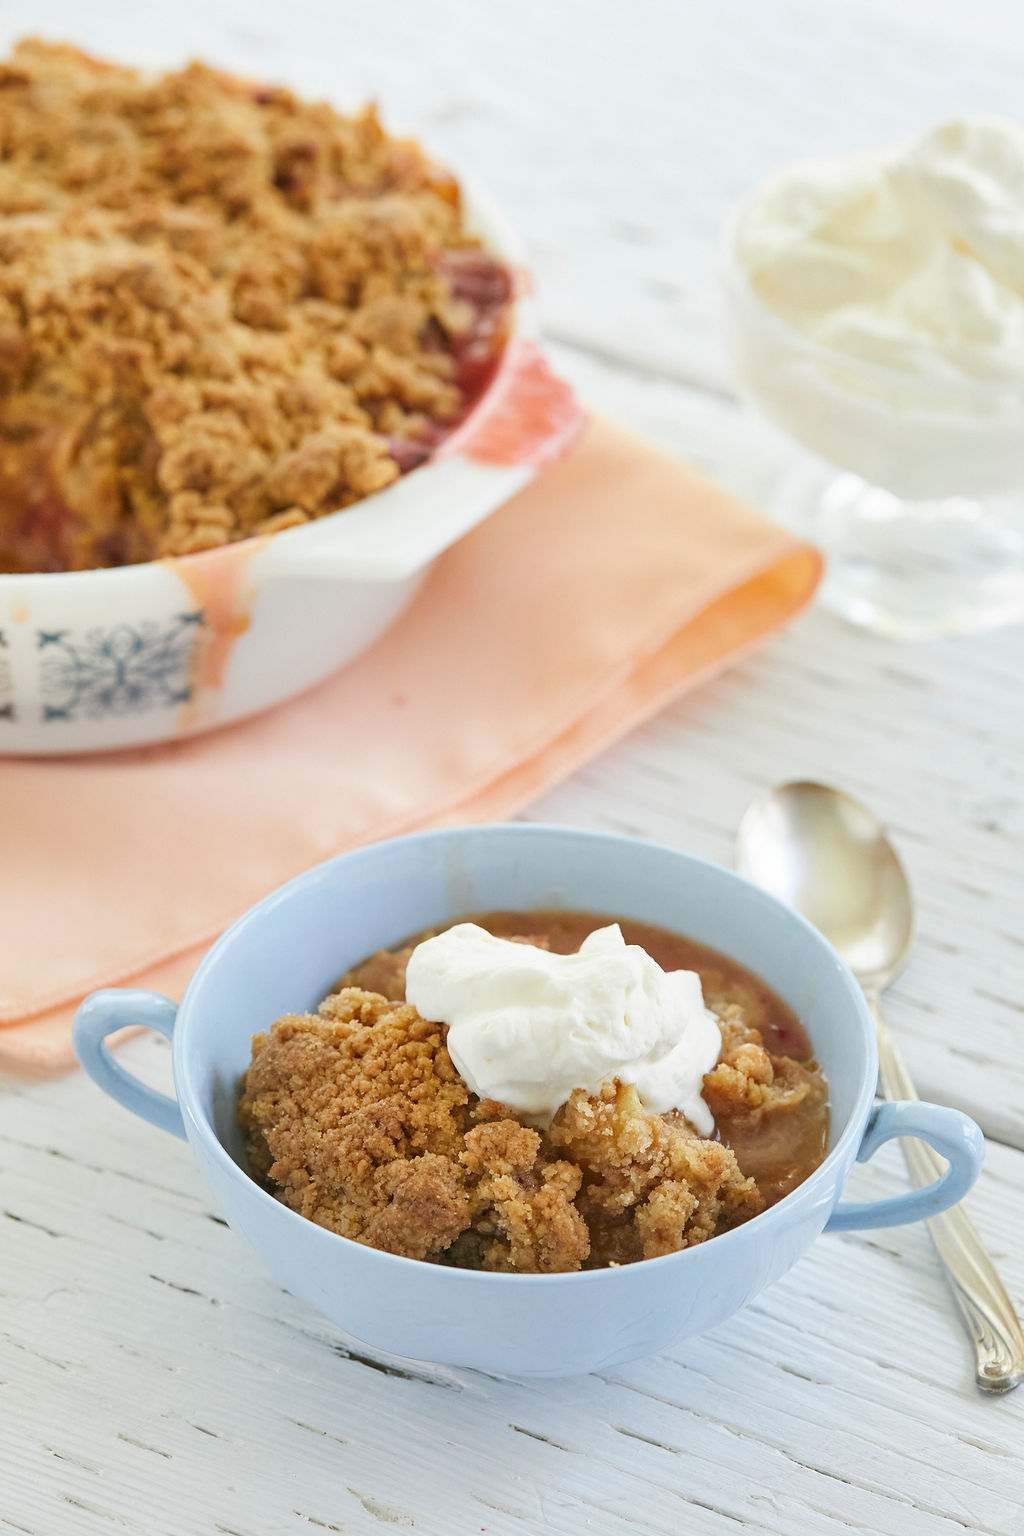 A portion of Rhubarb Crisp with a dollop of whipped cream on top.